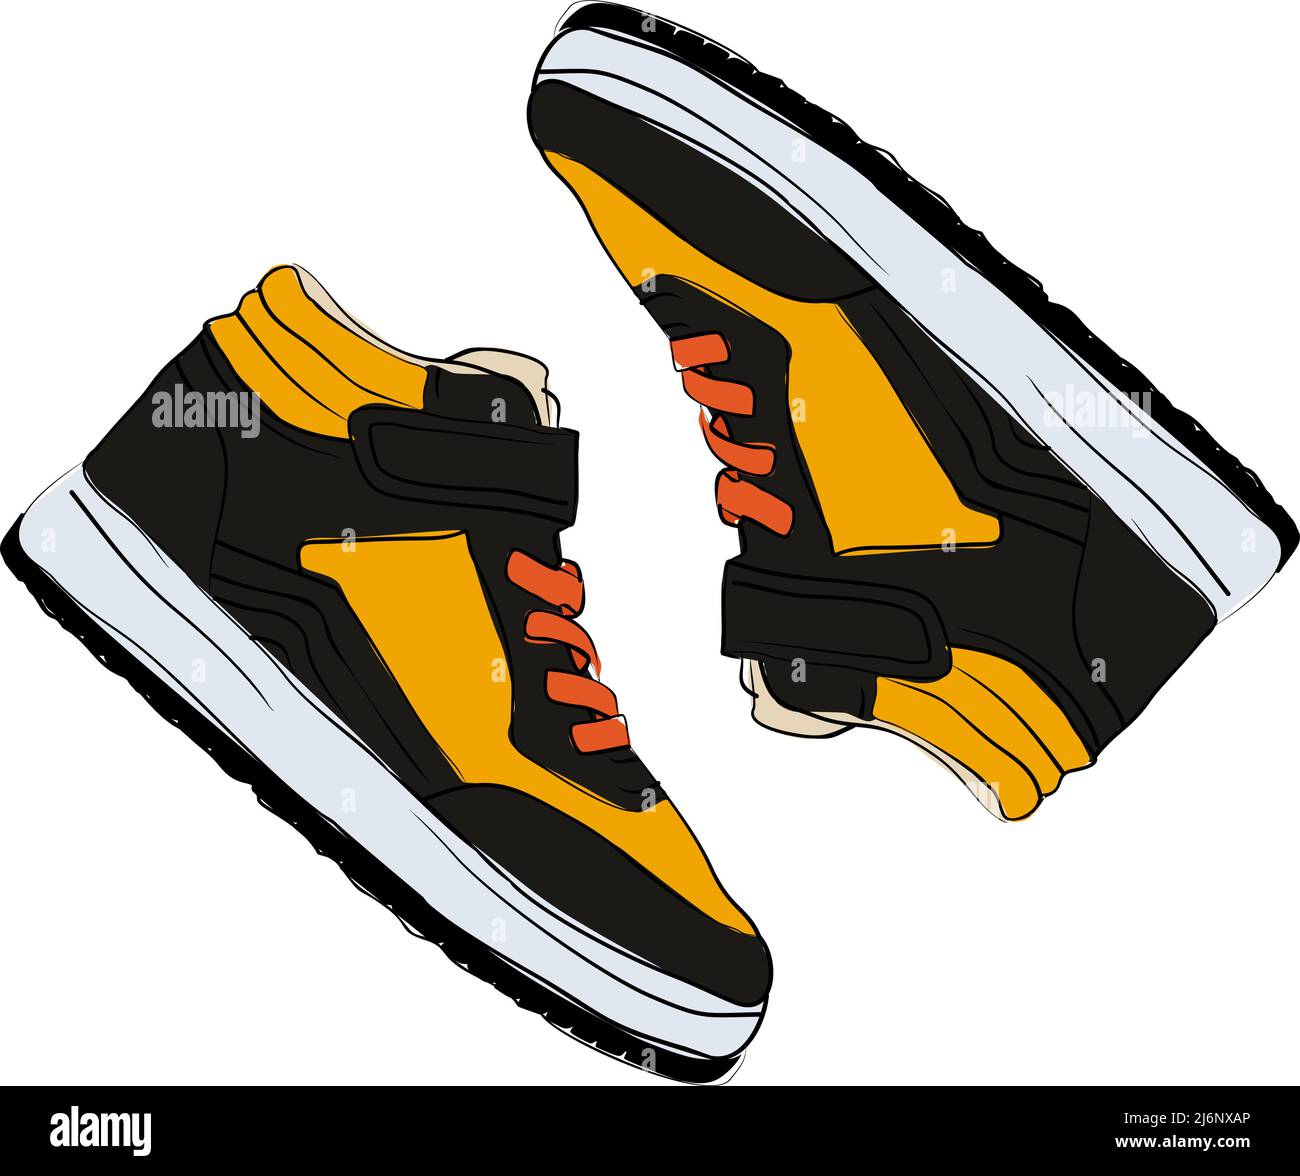 Sketch sneakers, concept drawing shoes, a sneaker with top view, flat design, colorful fashion shoe illustration, yellow black and orange colours Stock Vector